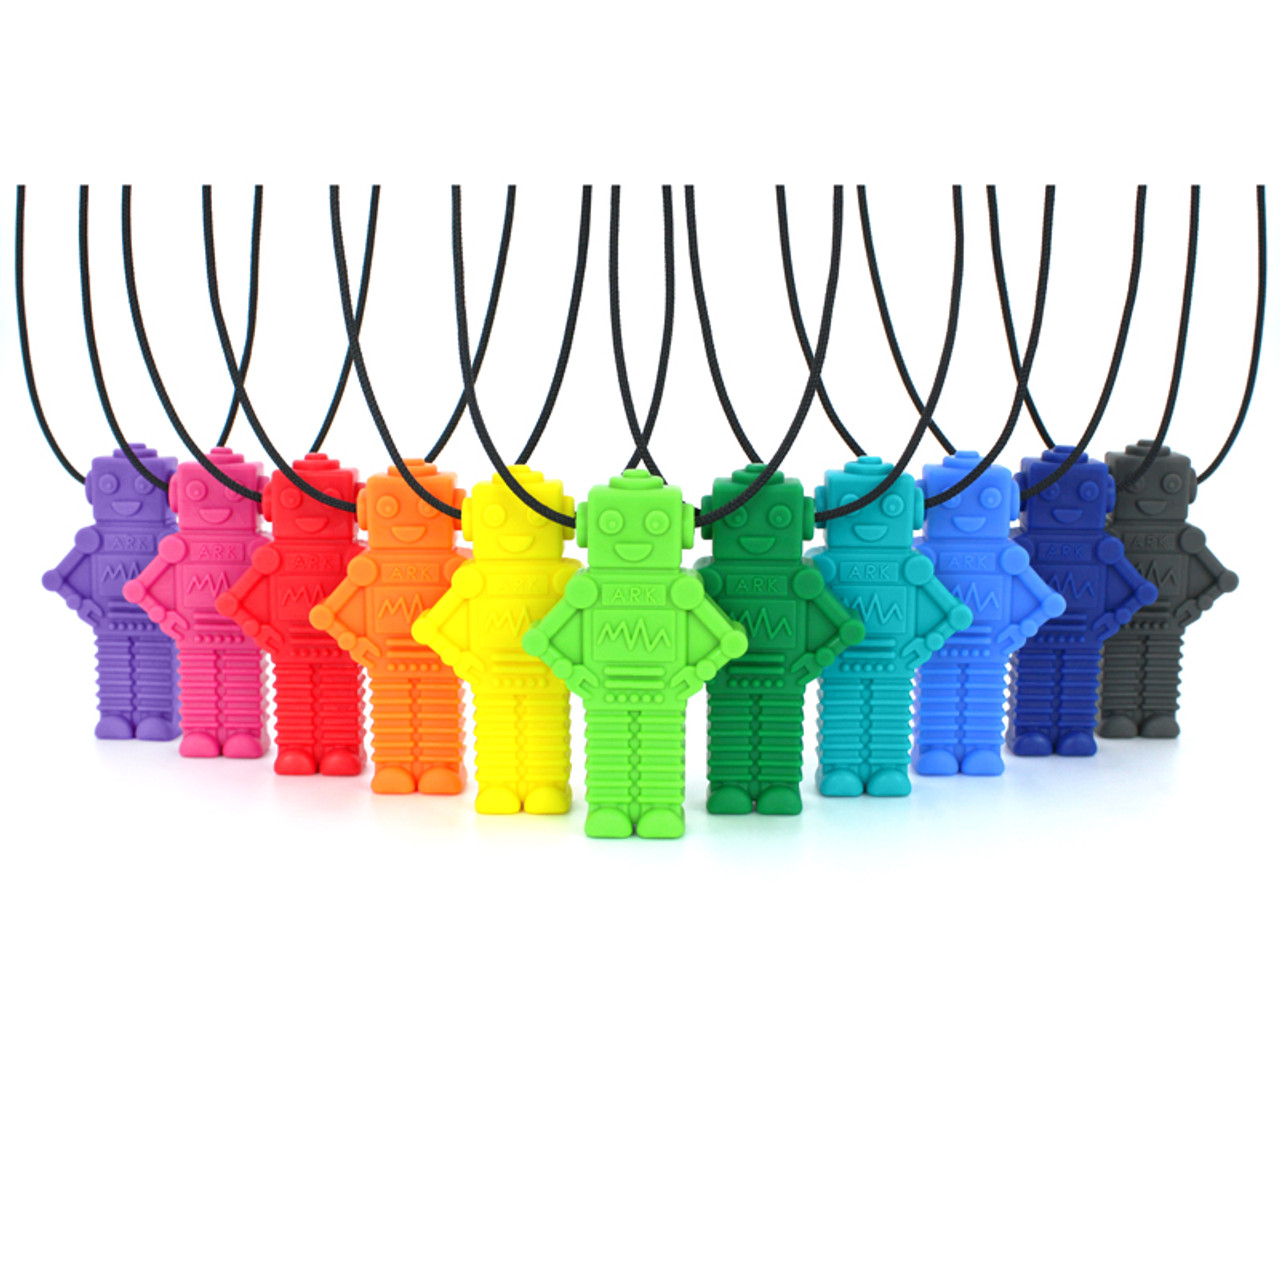 Chew Necklaces for Sensory Kids, Sensory Chewy Toys for Boys with Autism,  ADHD, SPD, Chewing, Silicone Chewing Necklace Reduce Adult Anxiety  Fidgeting : Amazon.sg: Health, Household and Personal Care